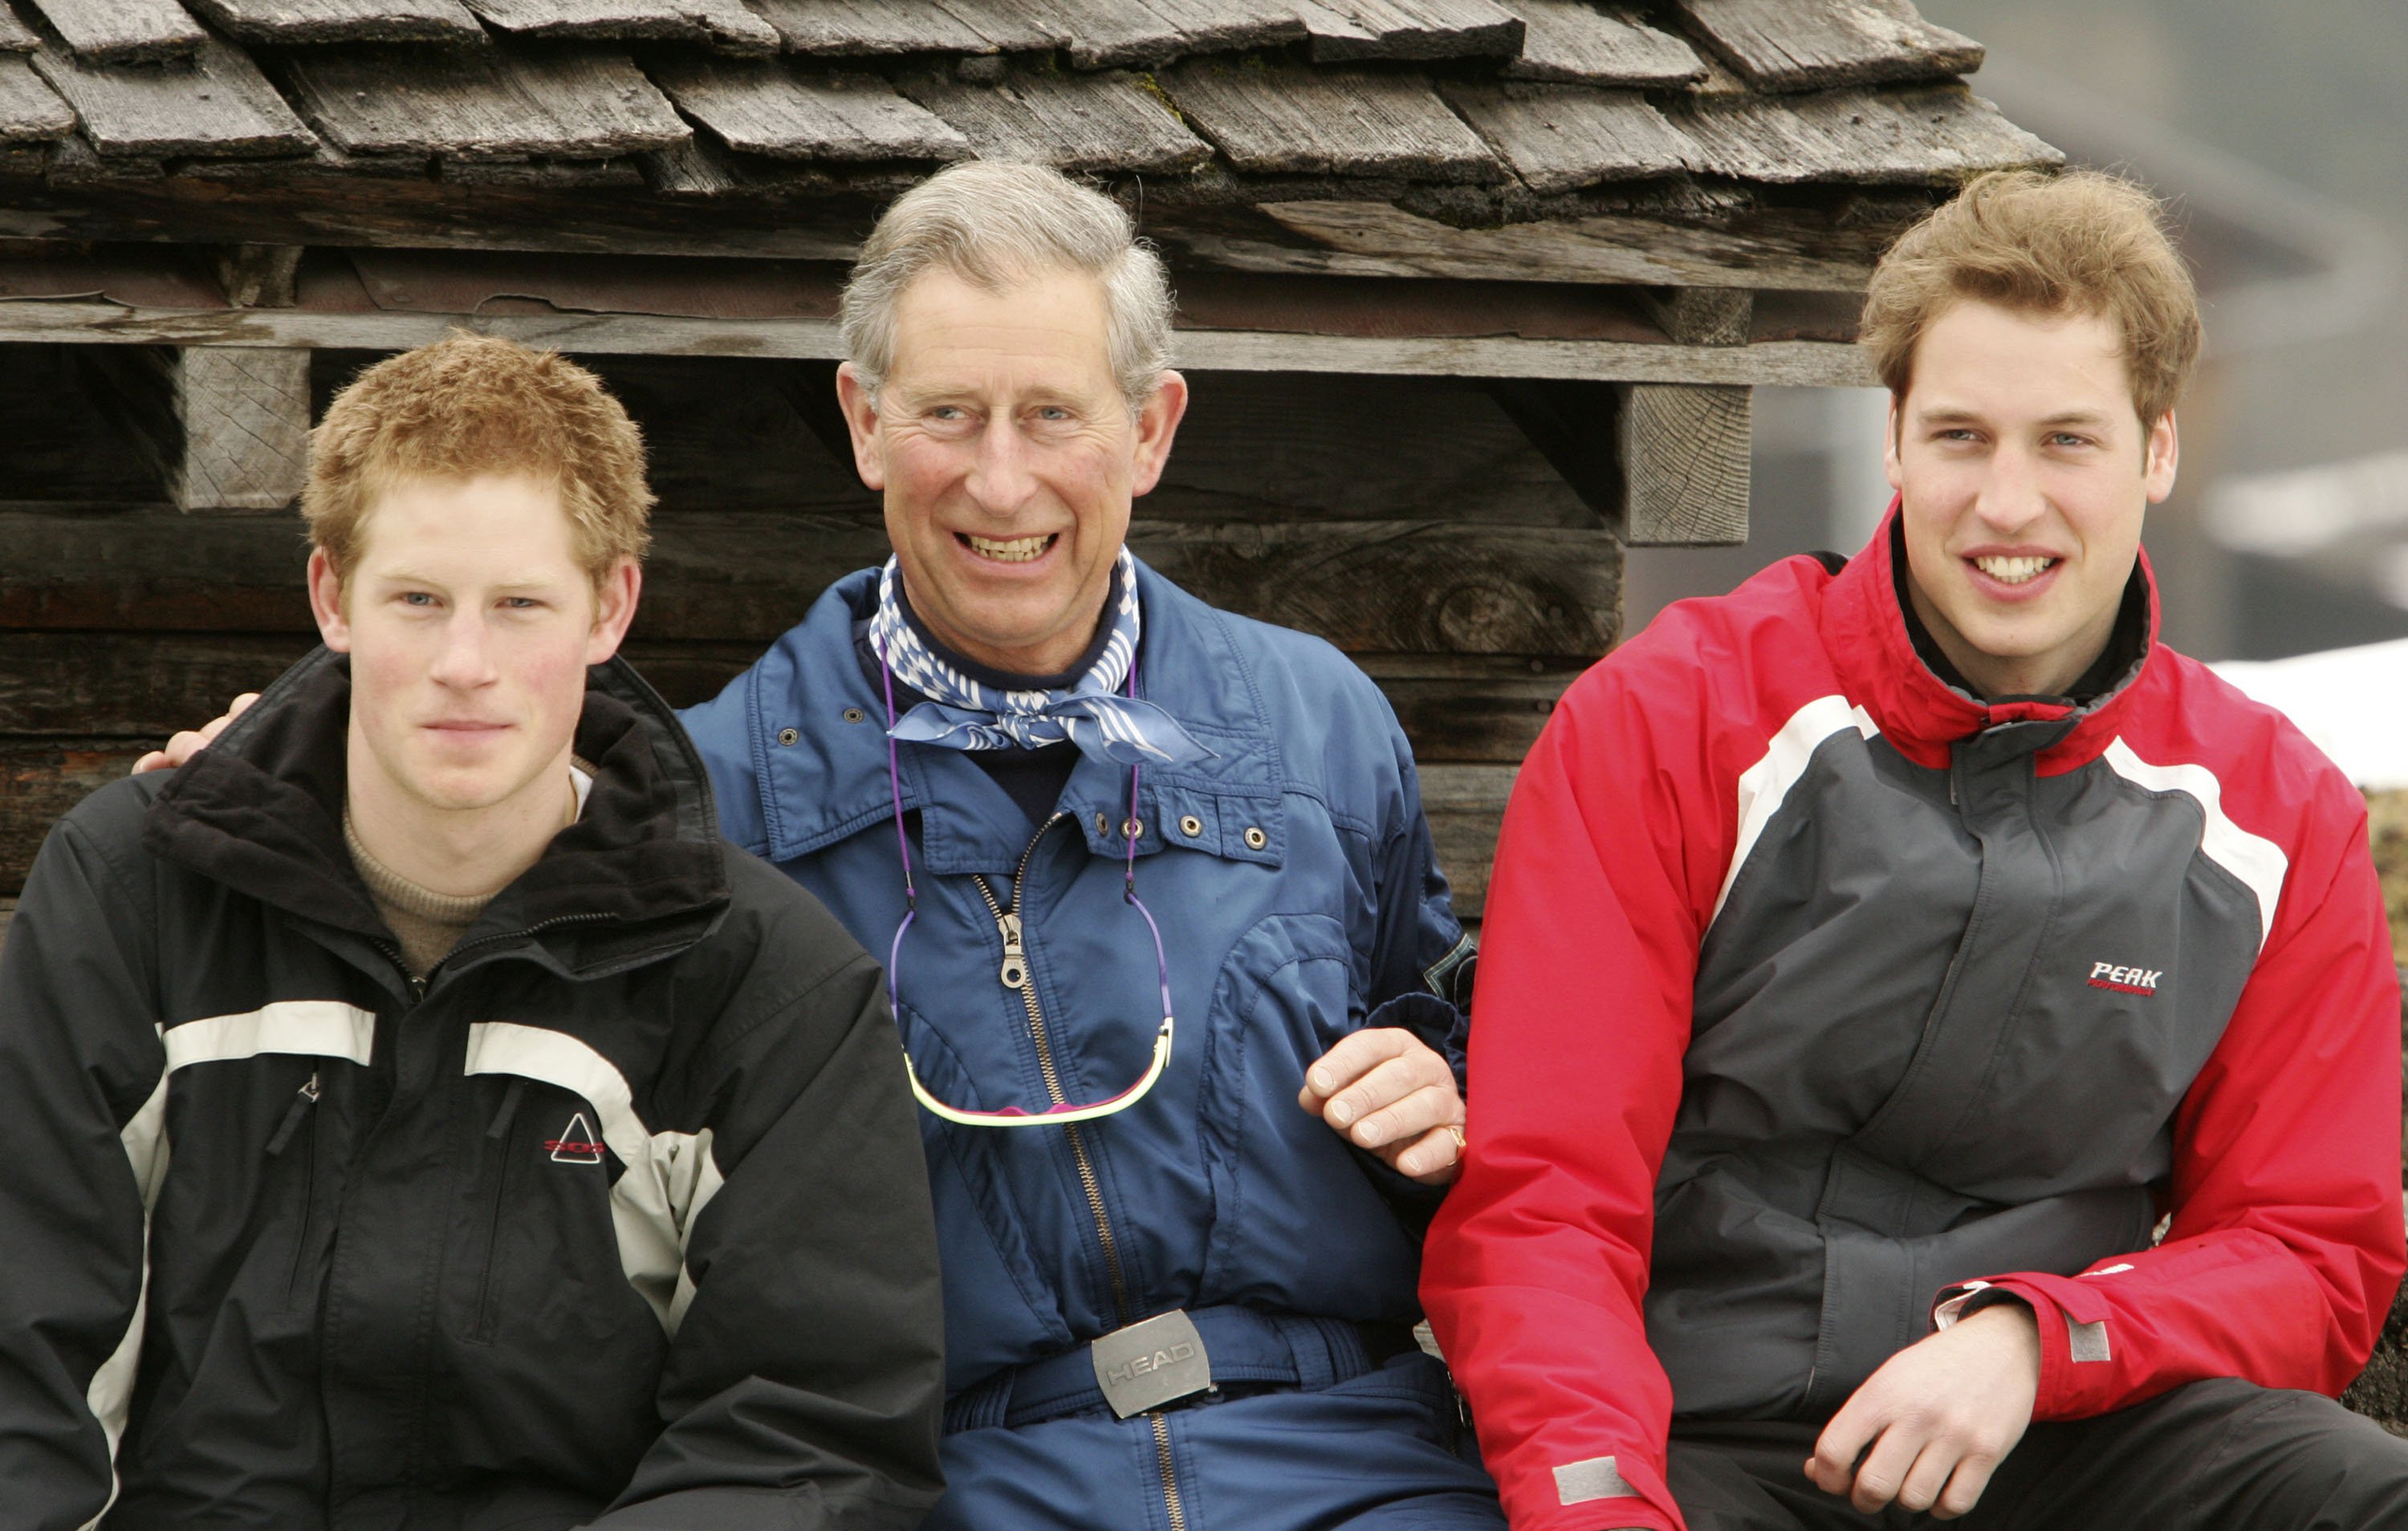 Prince Harry, Prince Charles, and Prince William during the Royal Family's ski break at Klosters on March 31, 2005, in Switzerland | Source: Getty Images